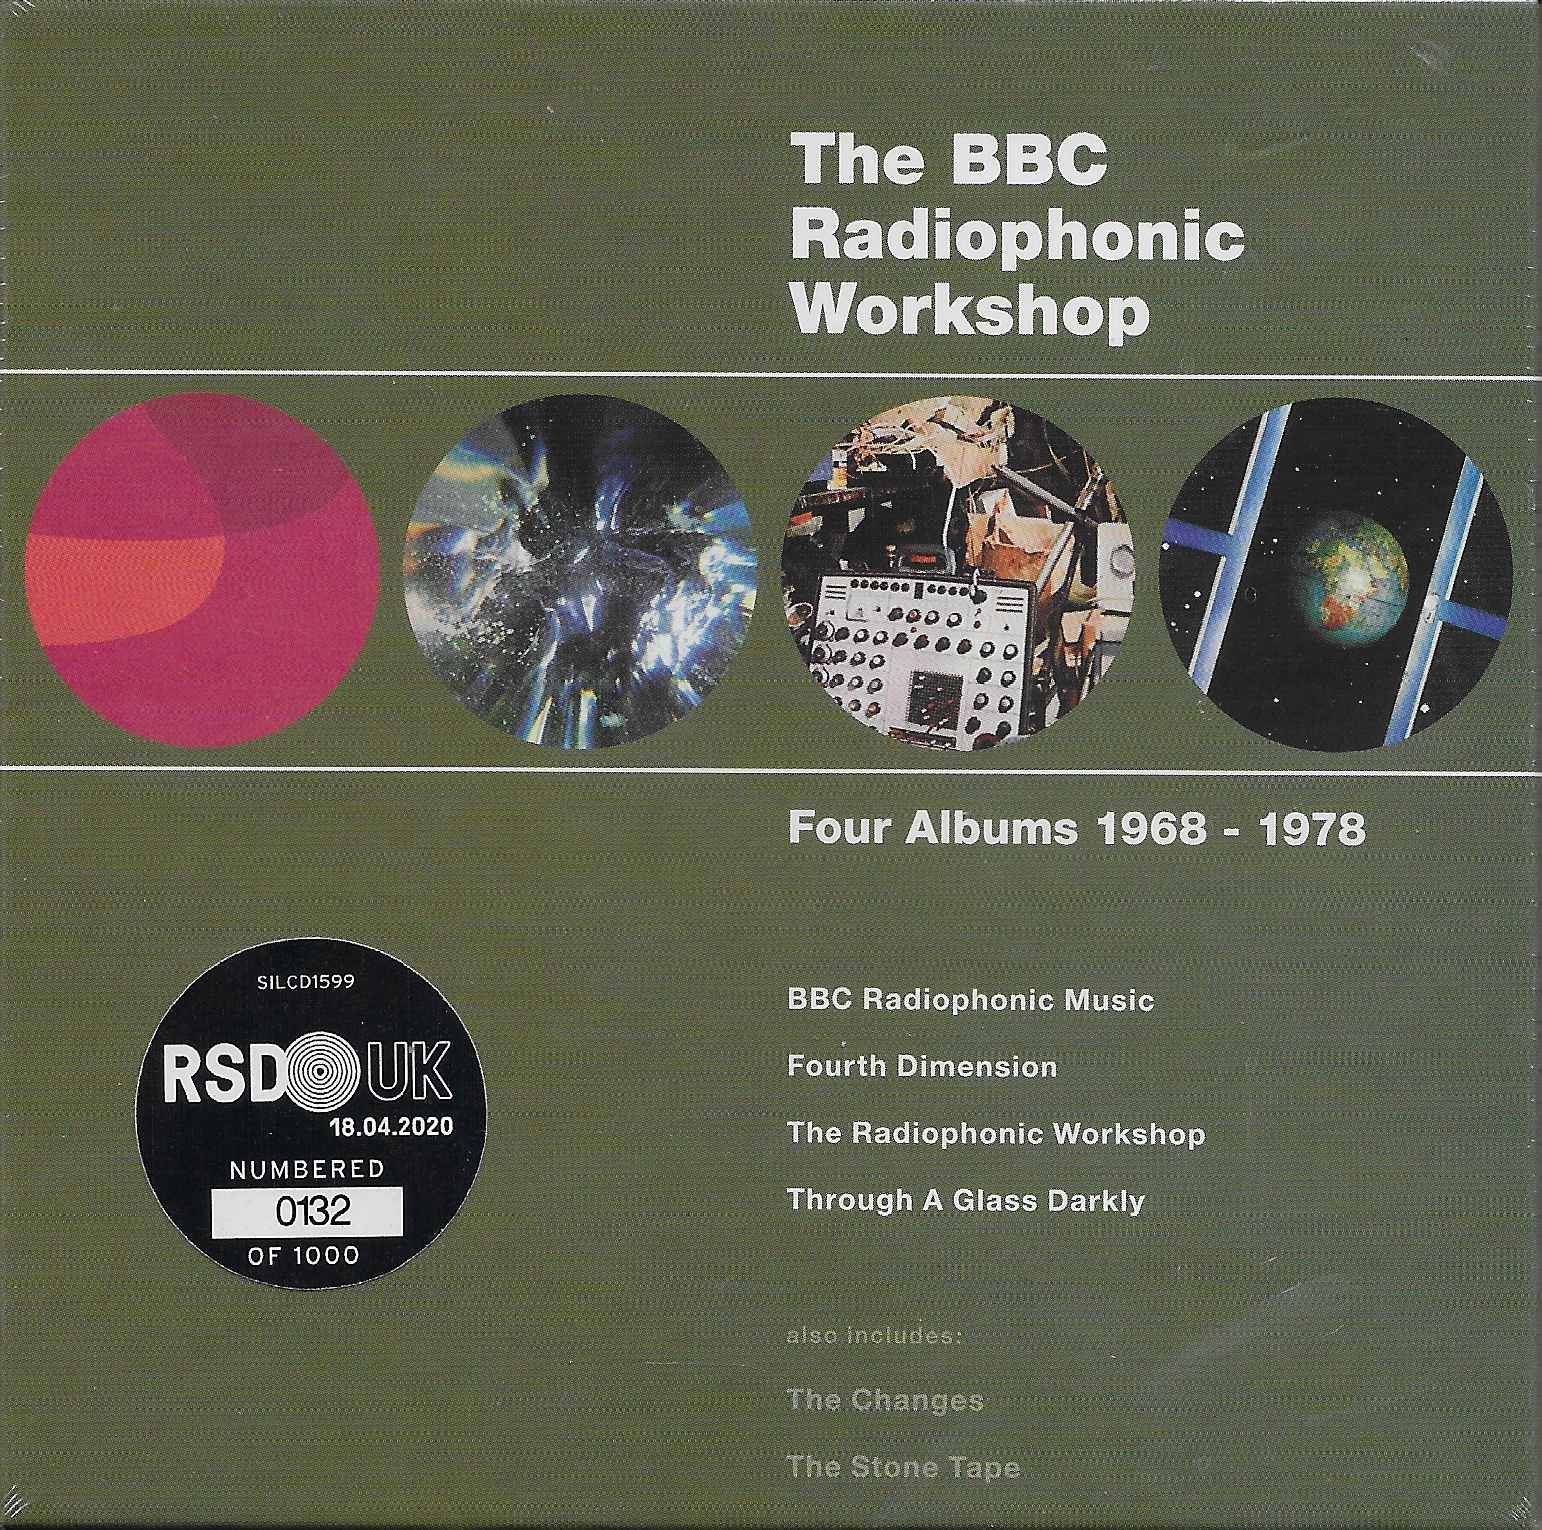 Picture of The BBC Radiophonic Workshop 1968 - 1978 by artist Various from the BBC cds - Records and Tapes library